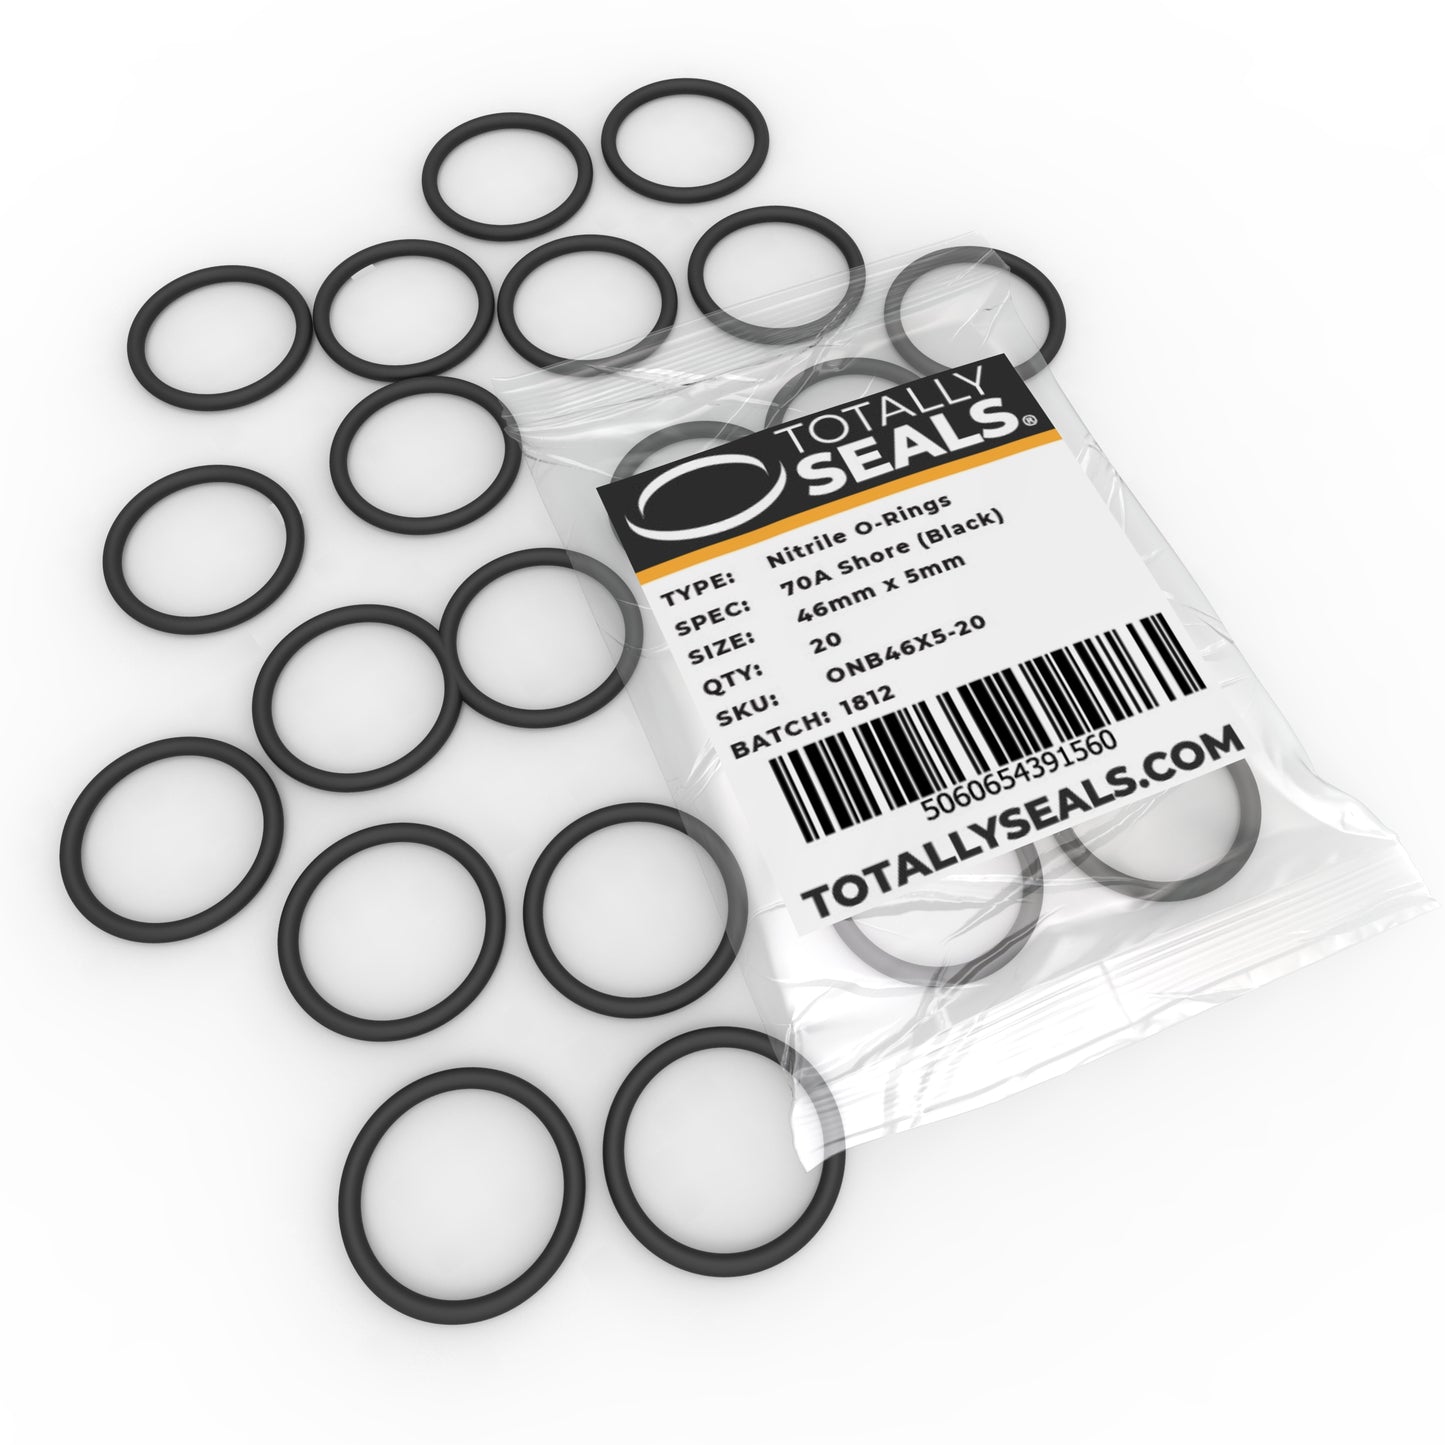 46mm x 5mm (56mm OD) Nitrile O-Rings - Totally Seals®